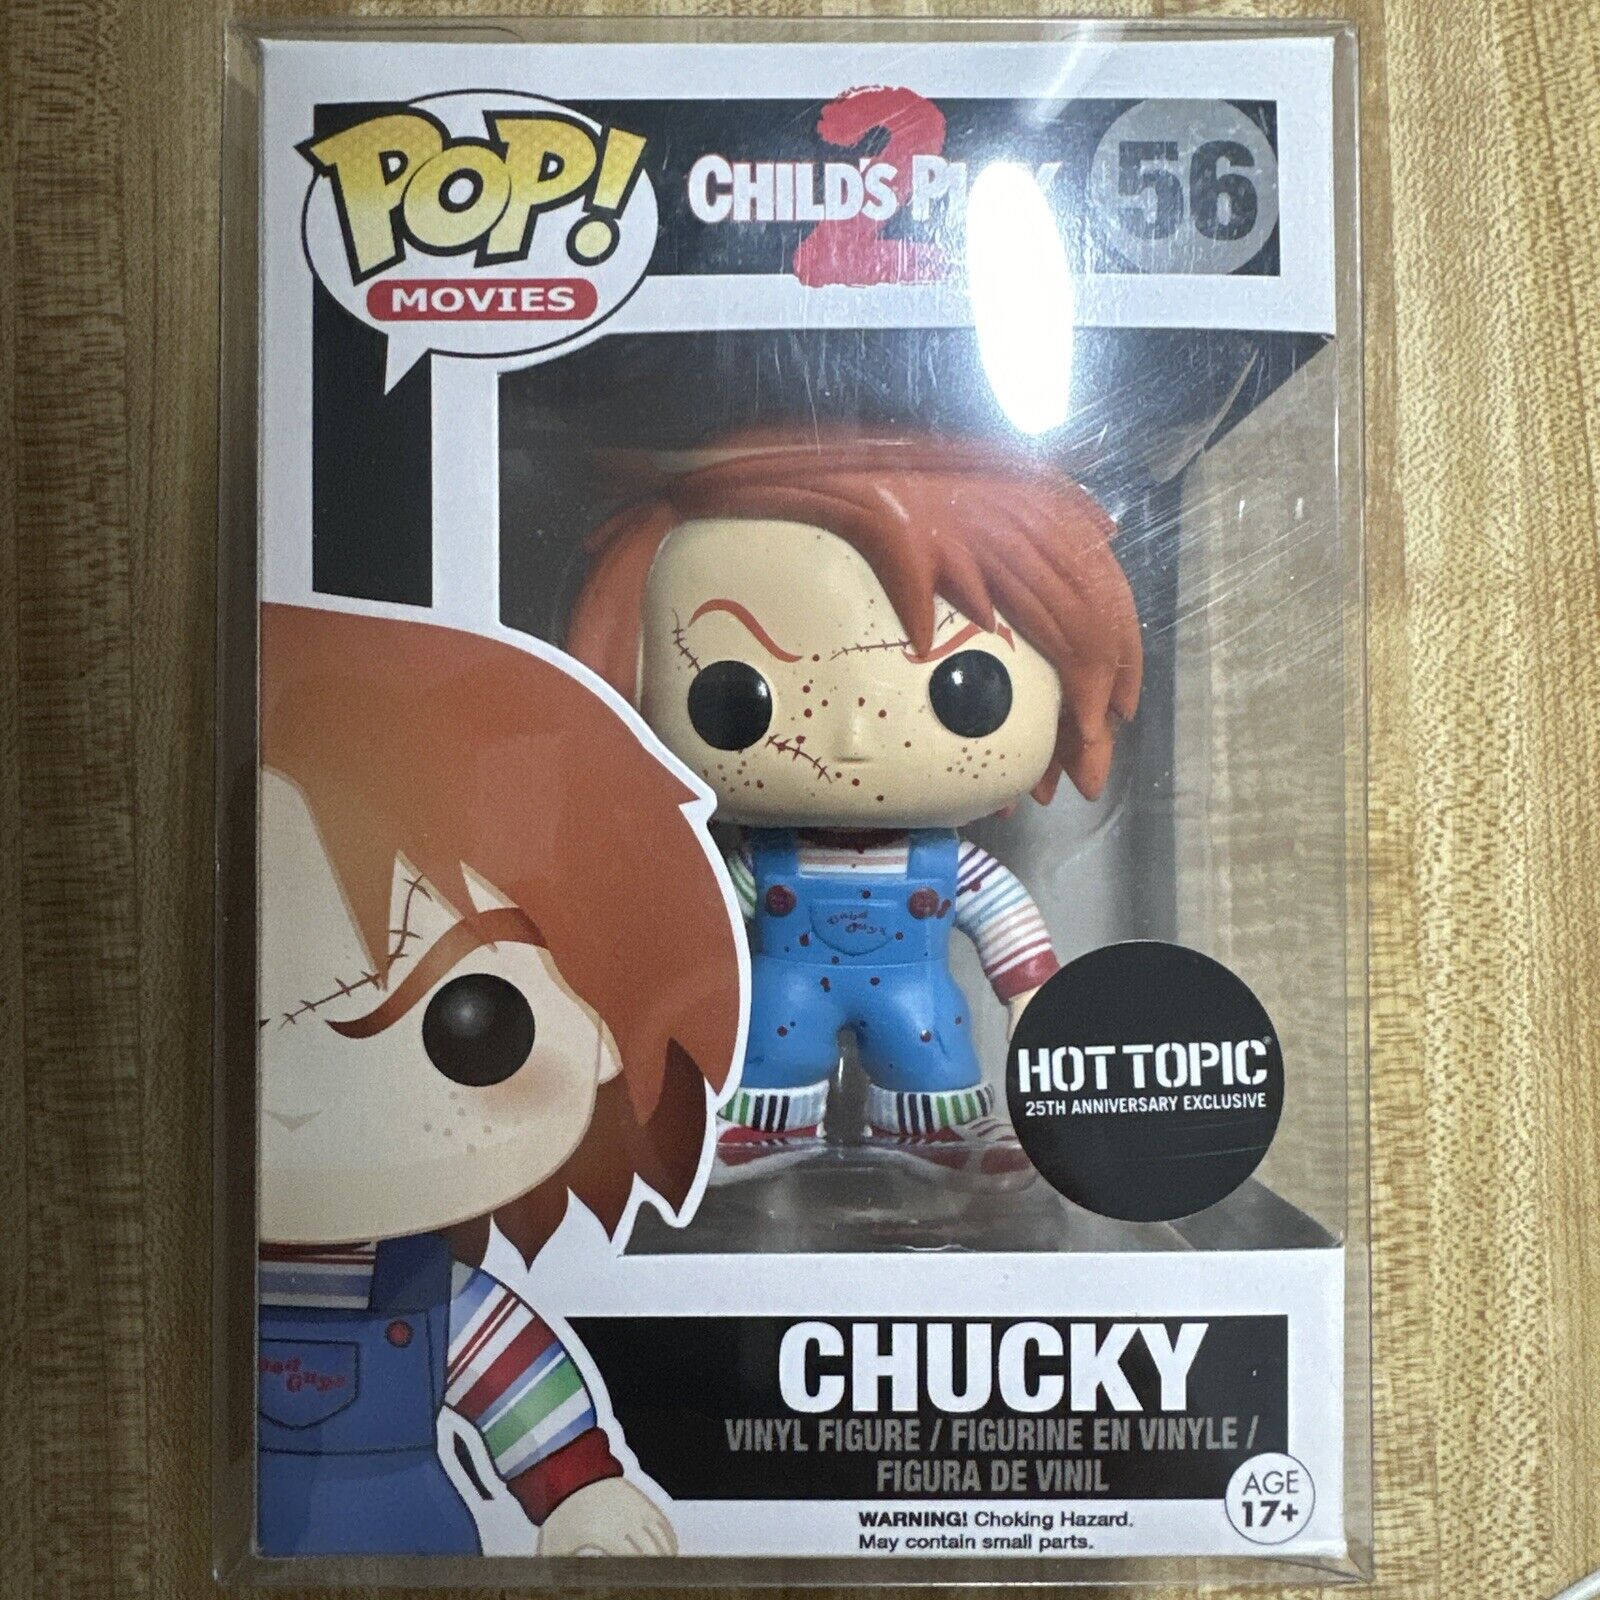 FUNKO POP 2014 MOVIES CHILD'S PLAY 2 CHUCKY #56 BLOODY HOT TOPIC - Pop Protector